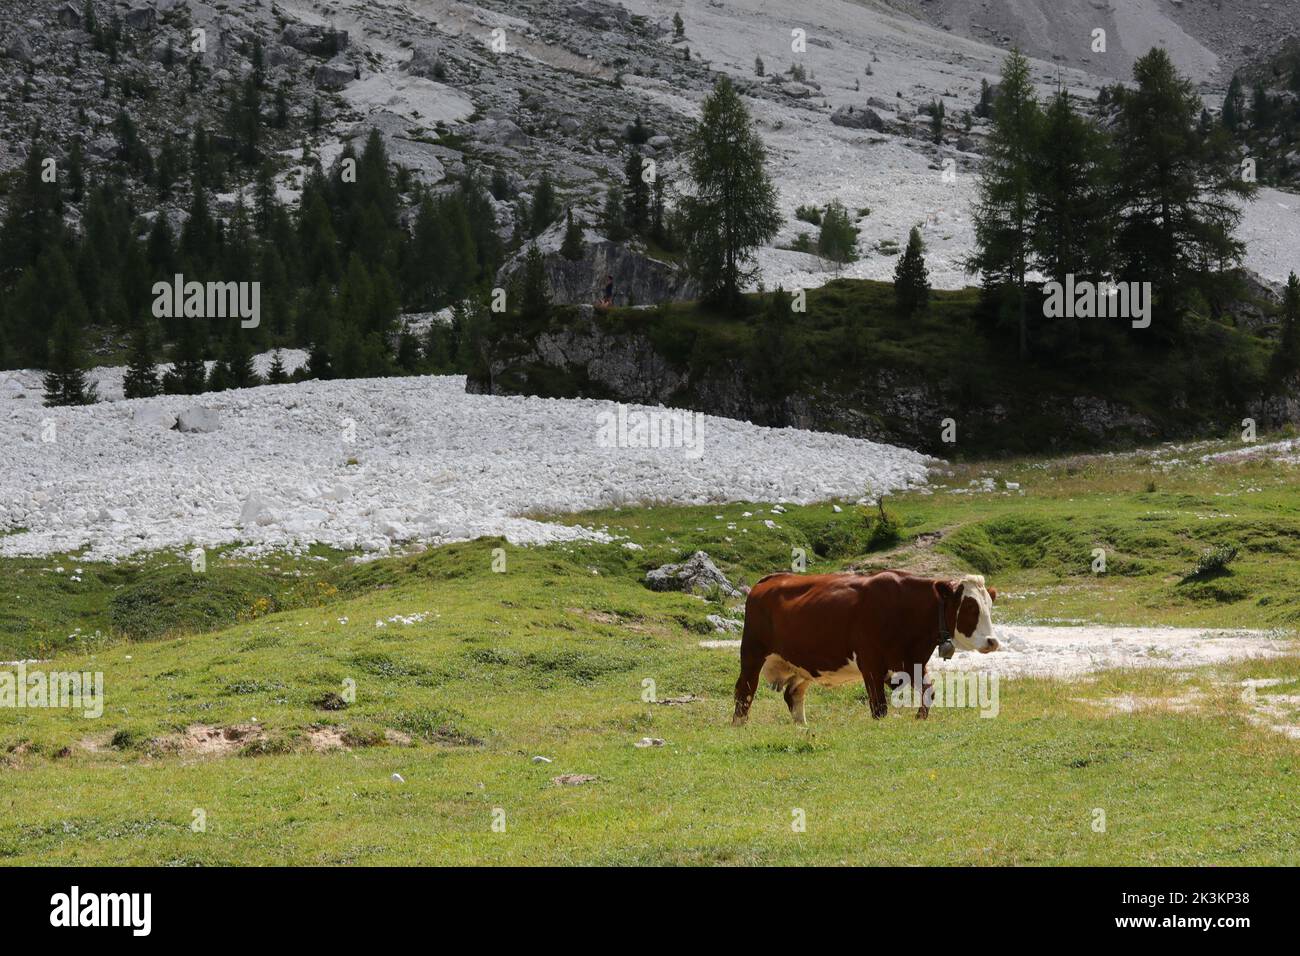 Grazing cow grazing the mountain grass free to graze in the meadows Stock Photo